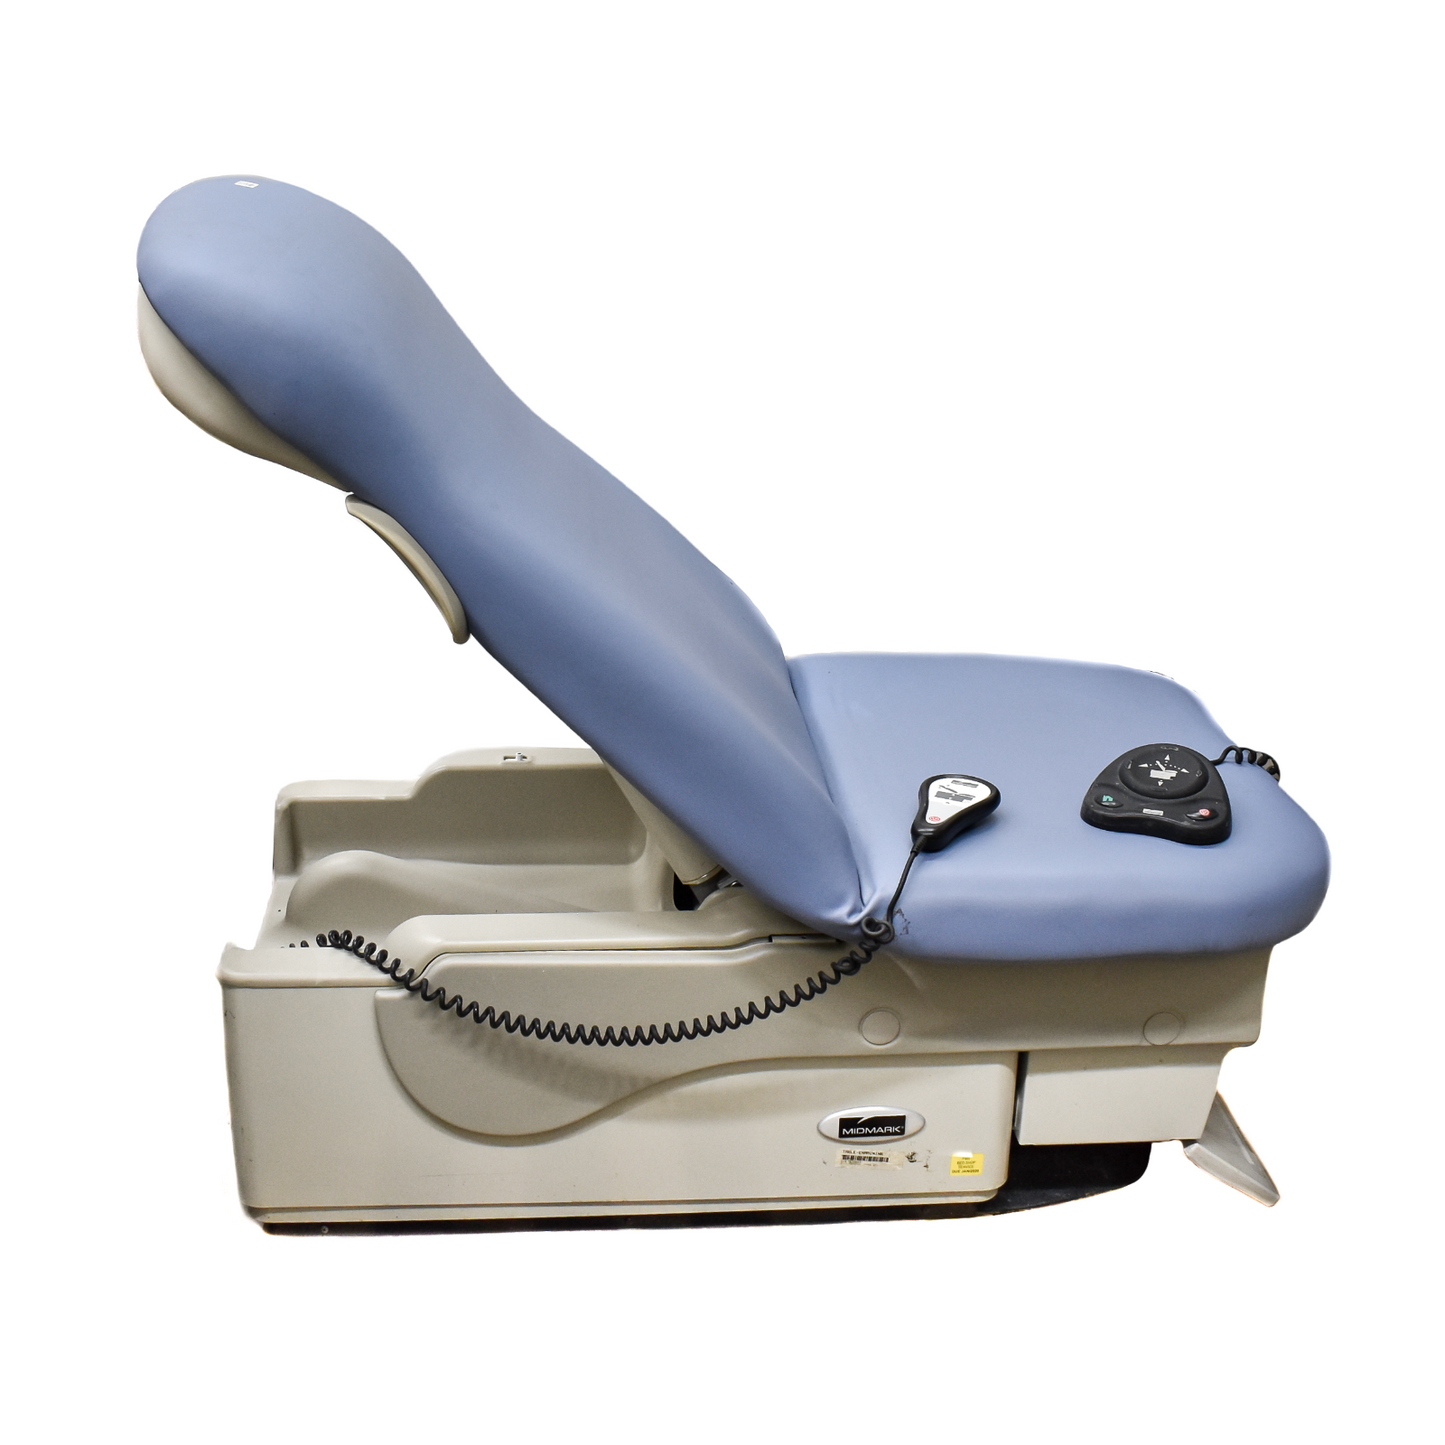 Midmark 623 Barrier Power Exam Table with Footswitch and Hand Controller 623-008